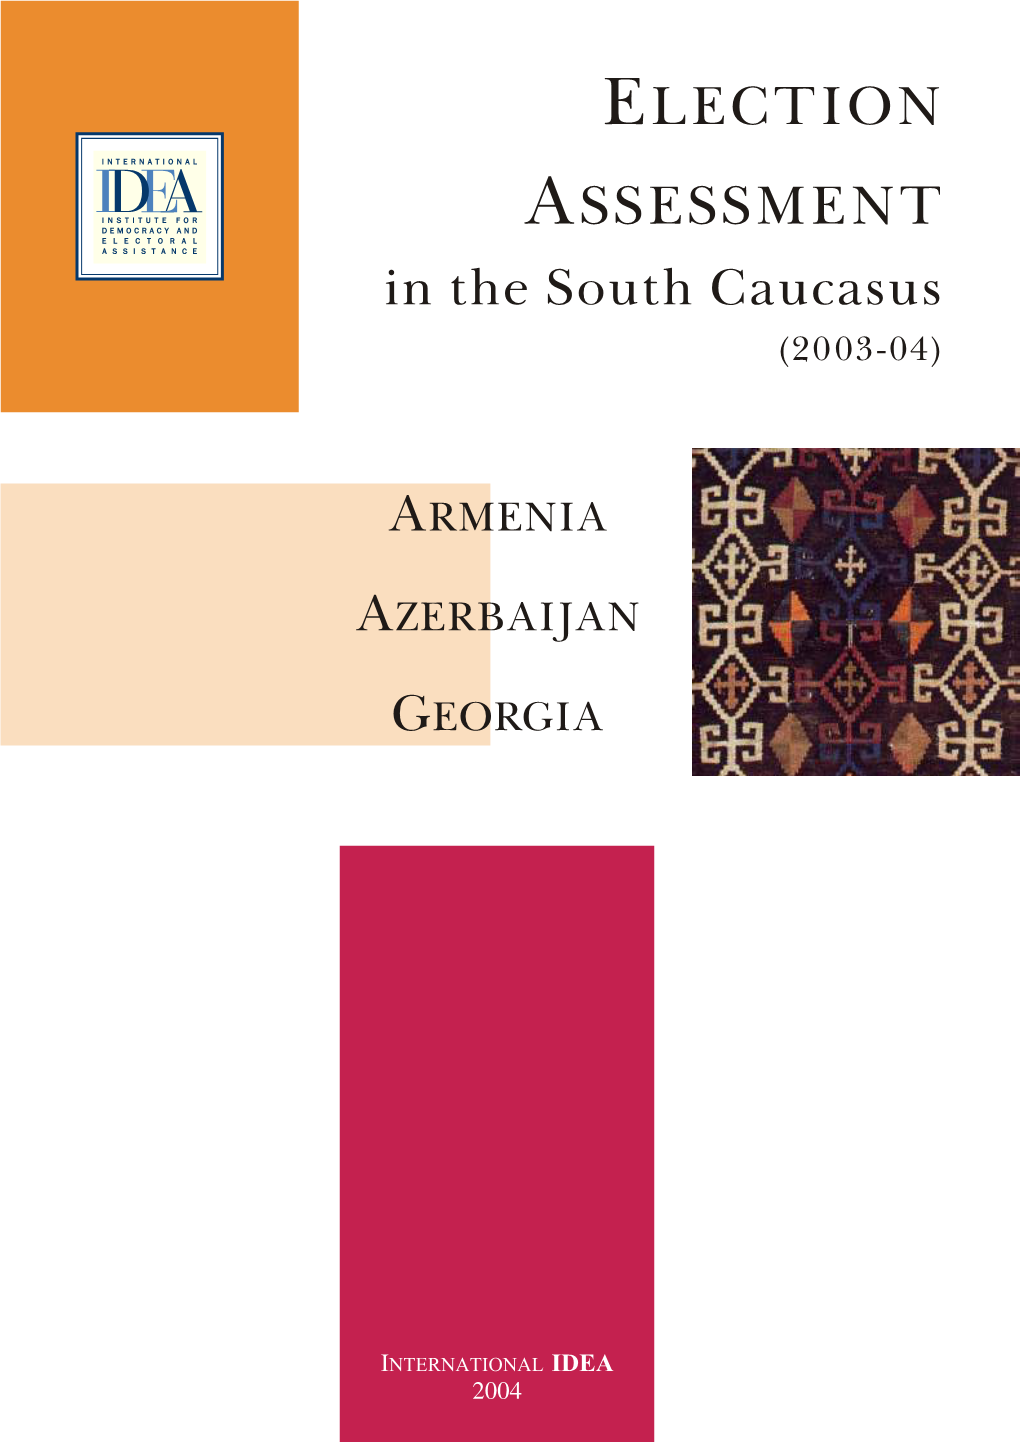 ELECTION ASSESSMENT in the South Caucasus (2003-04)